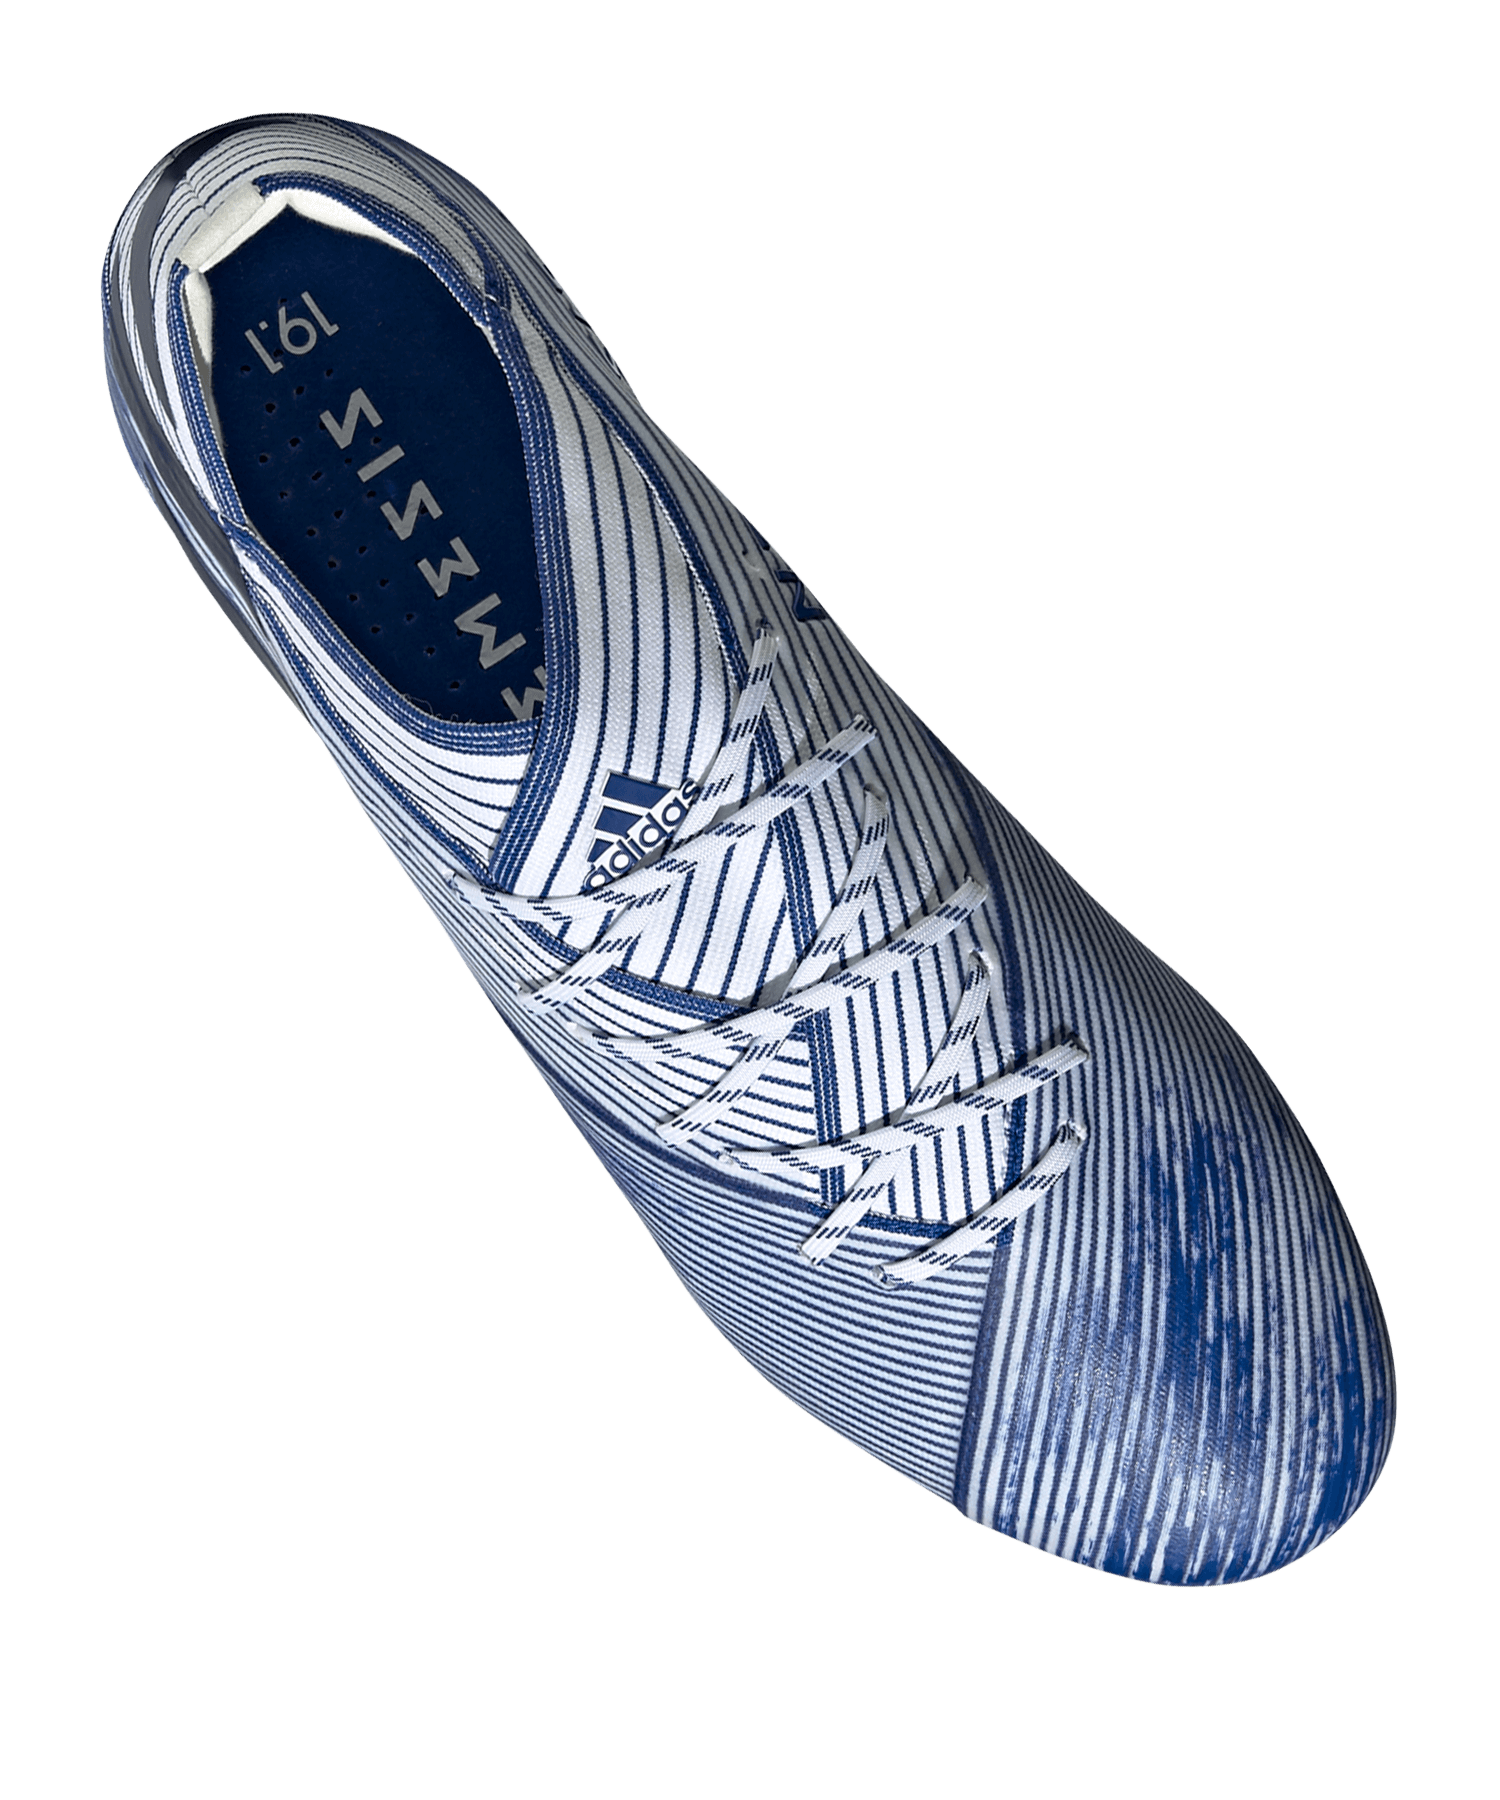 adidas Launch The New Predator Edge As Part Of The Sapphire Edge Pack -  SoccerBible